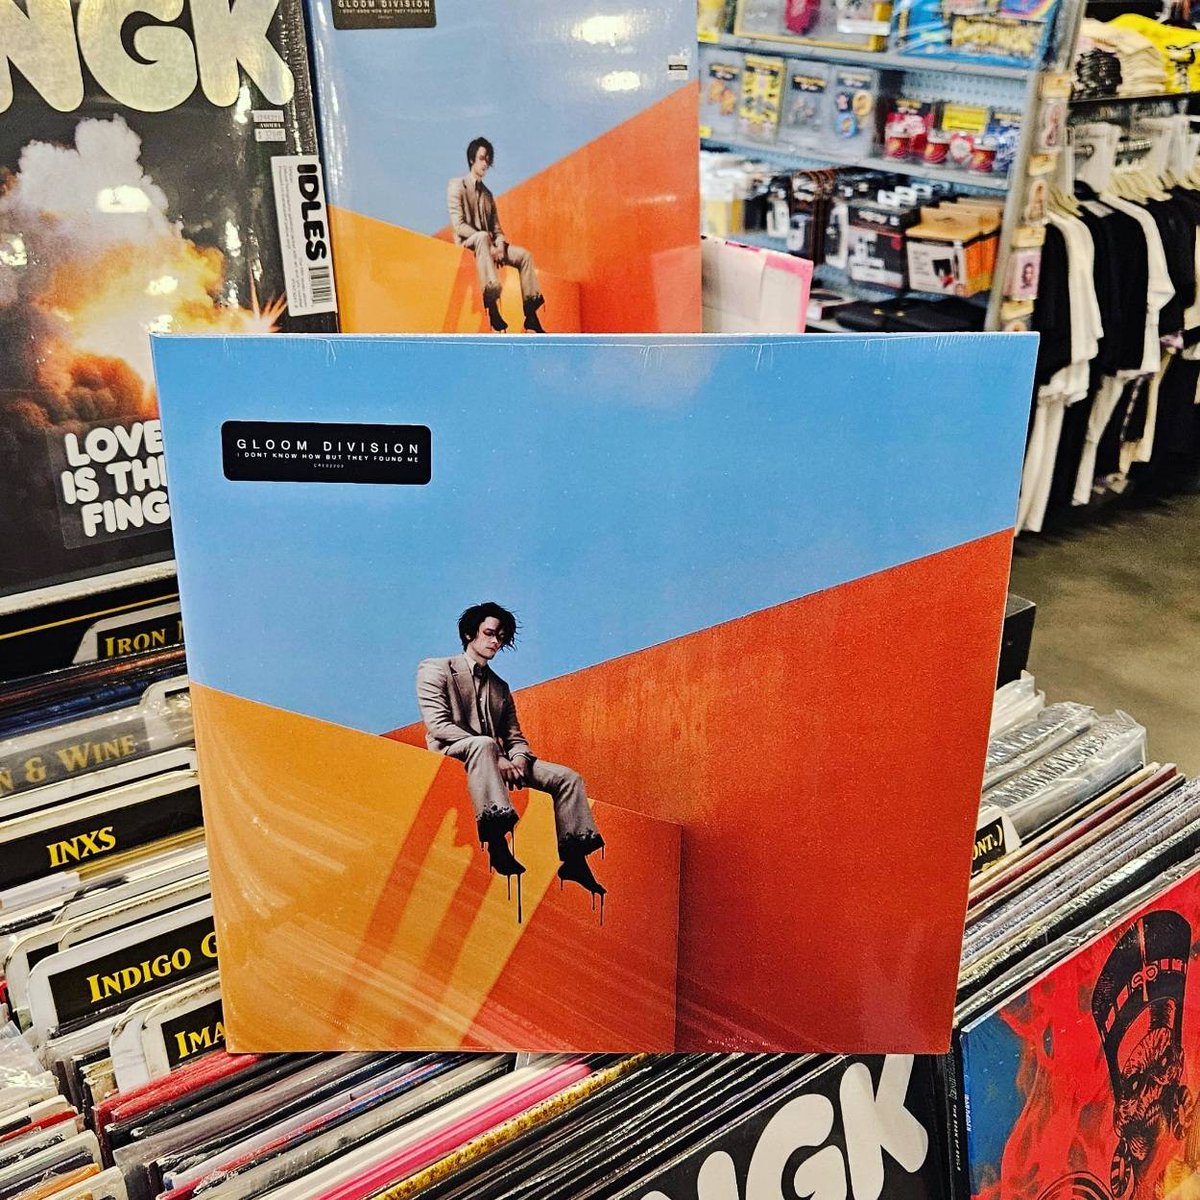 'Gloom Division,' the second studio album by @IDKHOW, is out now via @concordrecords! It's available on CD and indie exclusive dreamsicle color LP. Get it here: bit.ly/3I7JMAz